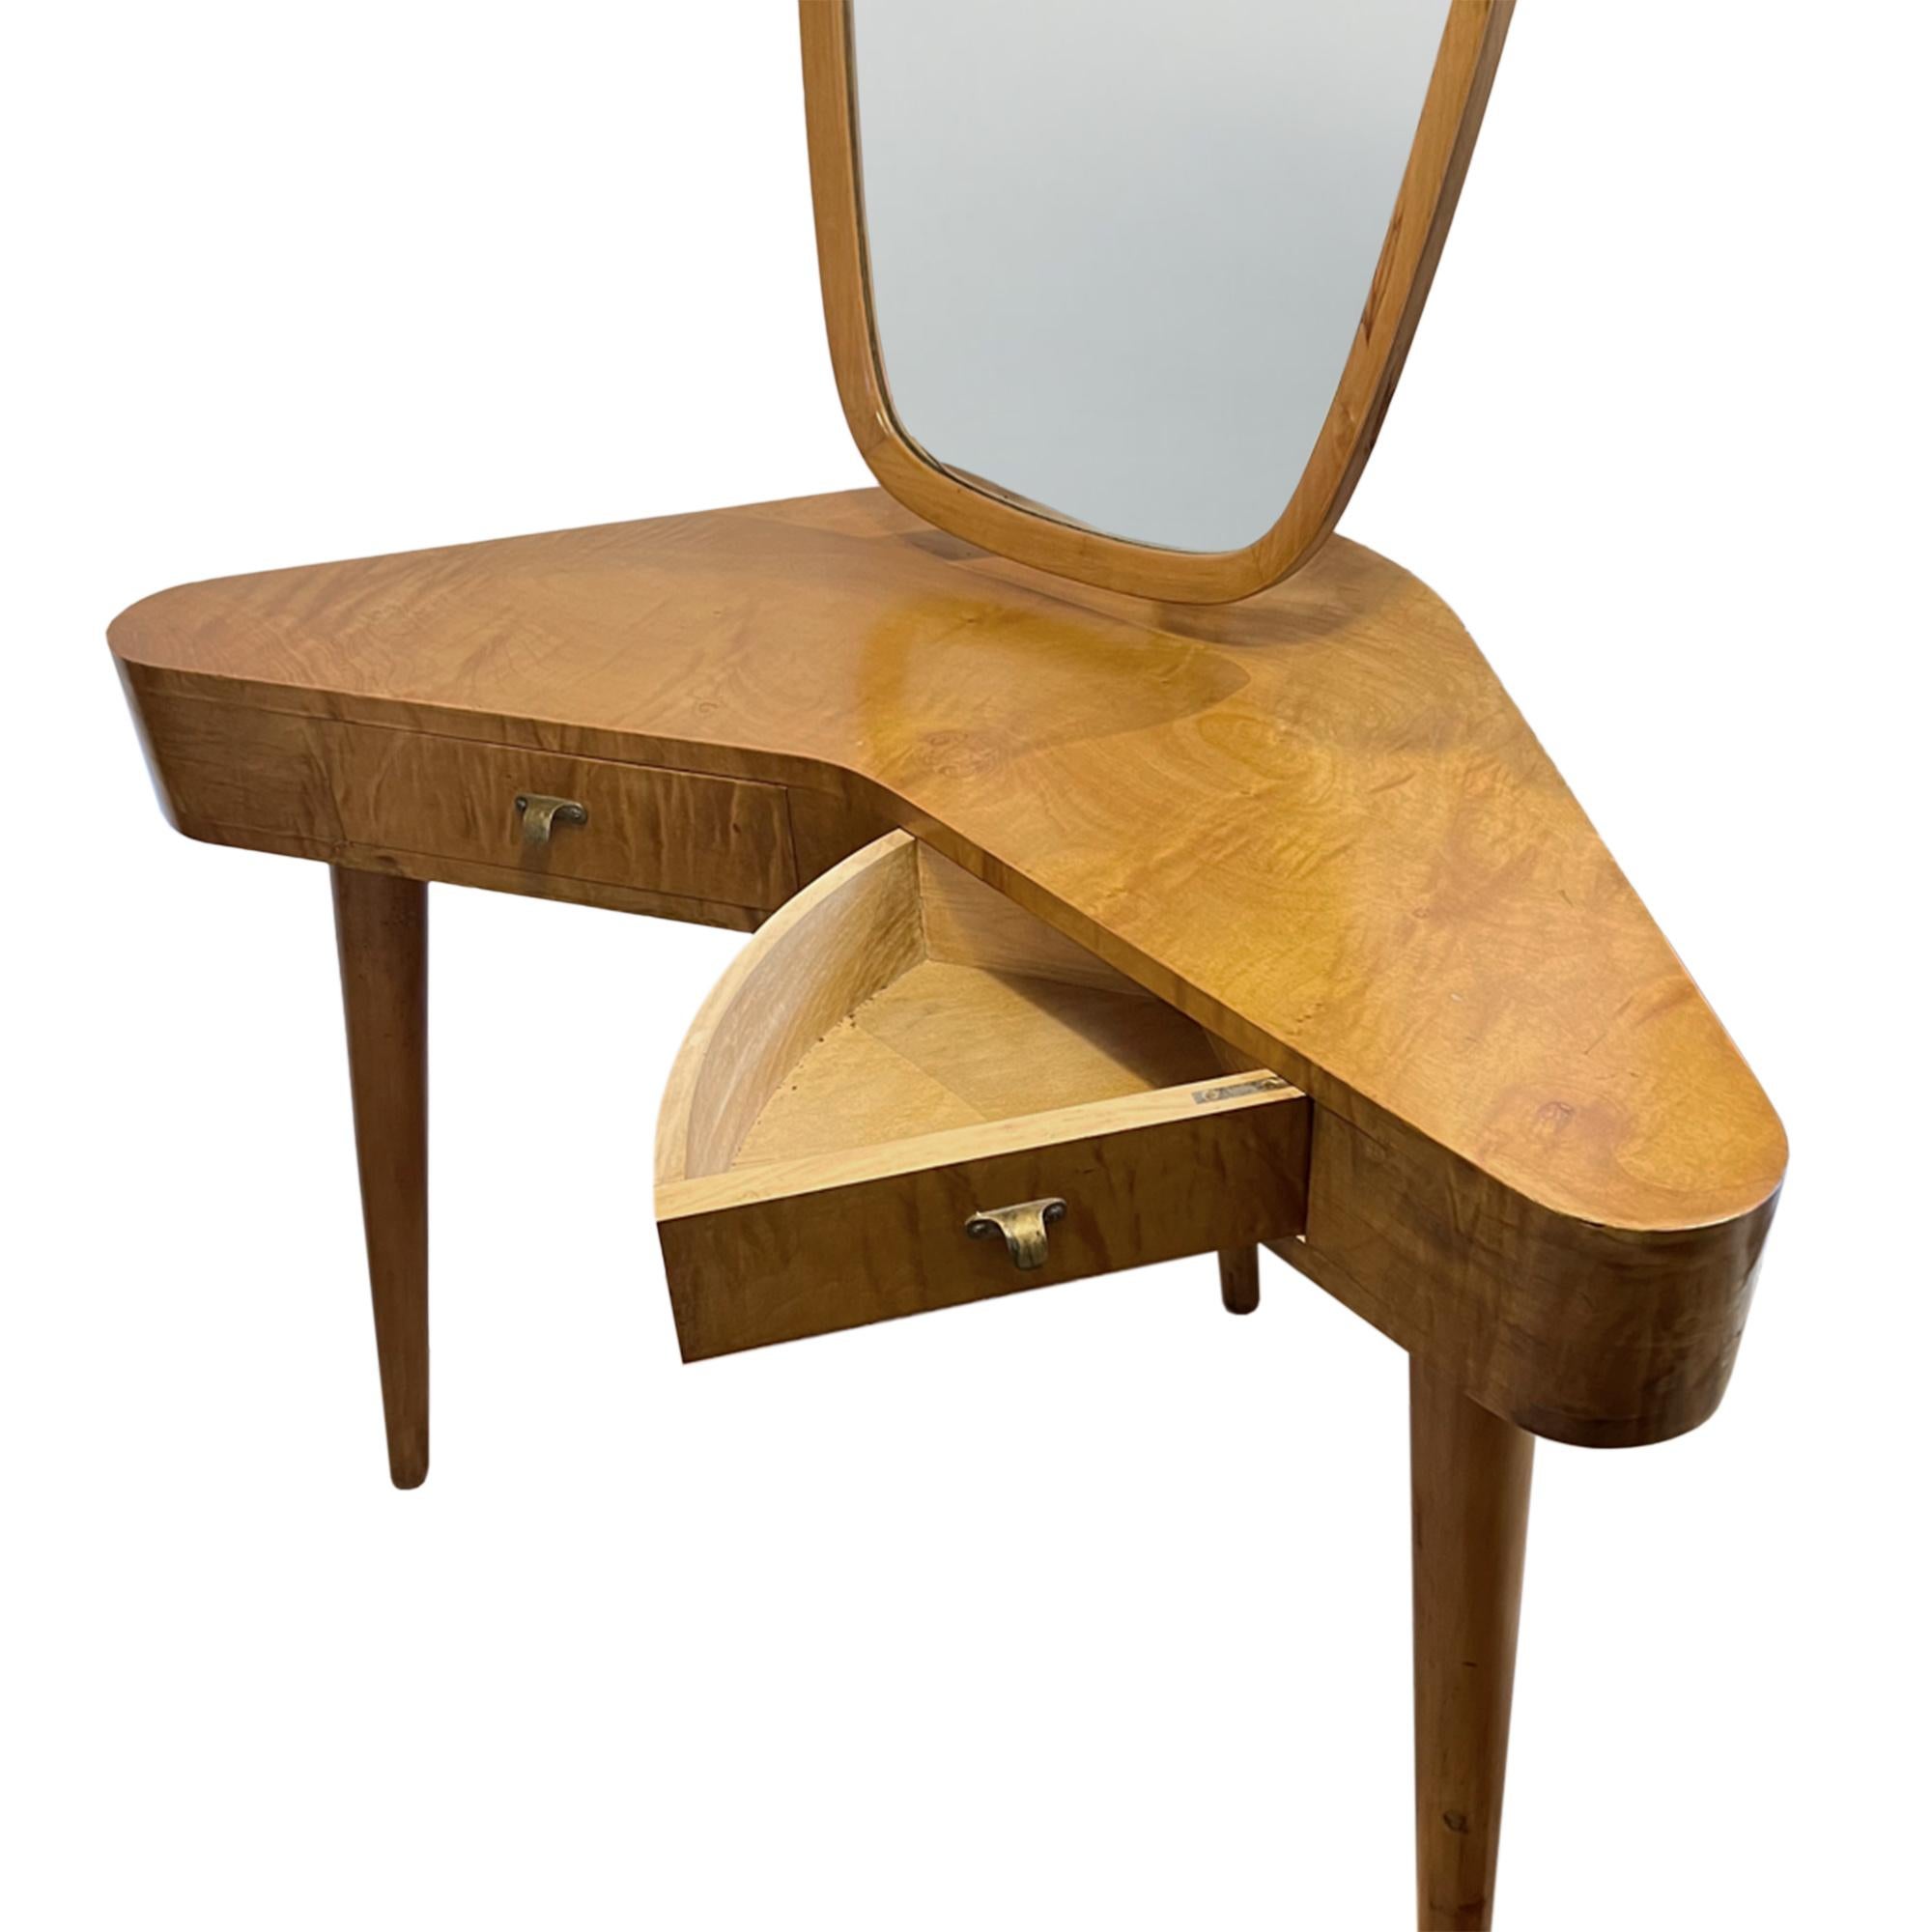 This super elegant dressing table is crafted from cherrywood and was made in Italy in the 1960s. 

The design allows it to sit free standing as it is finished all the way round. 

The 2 good sized drawers open out to the external sides to ensure